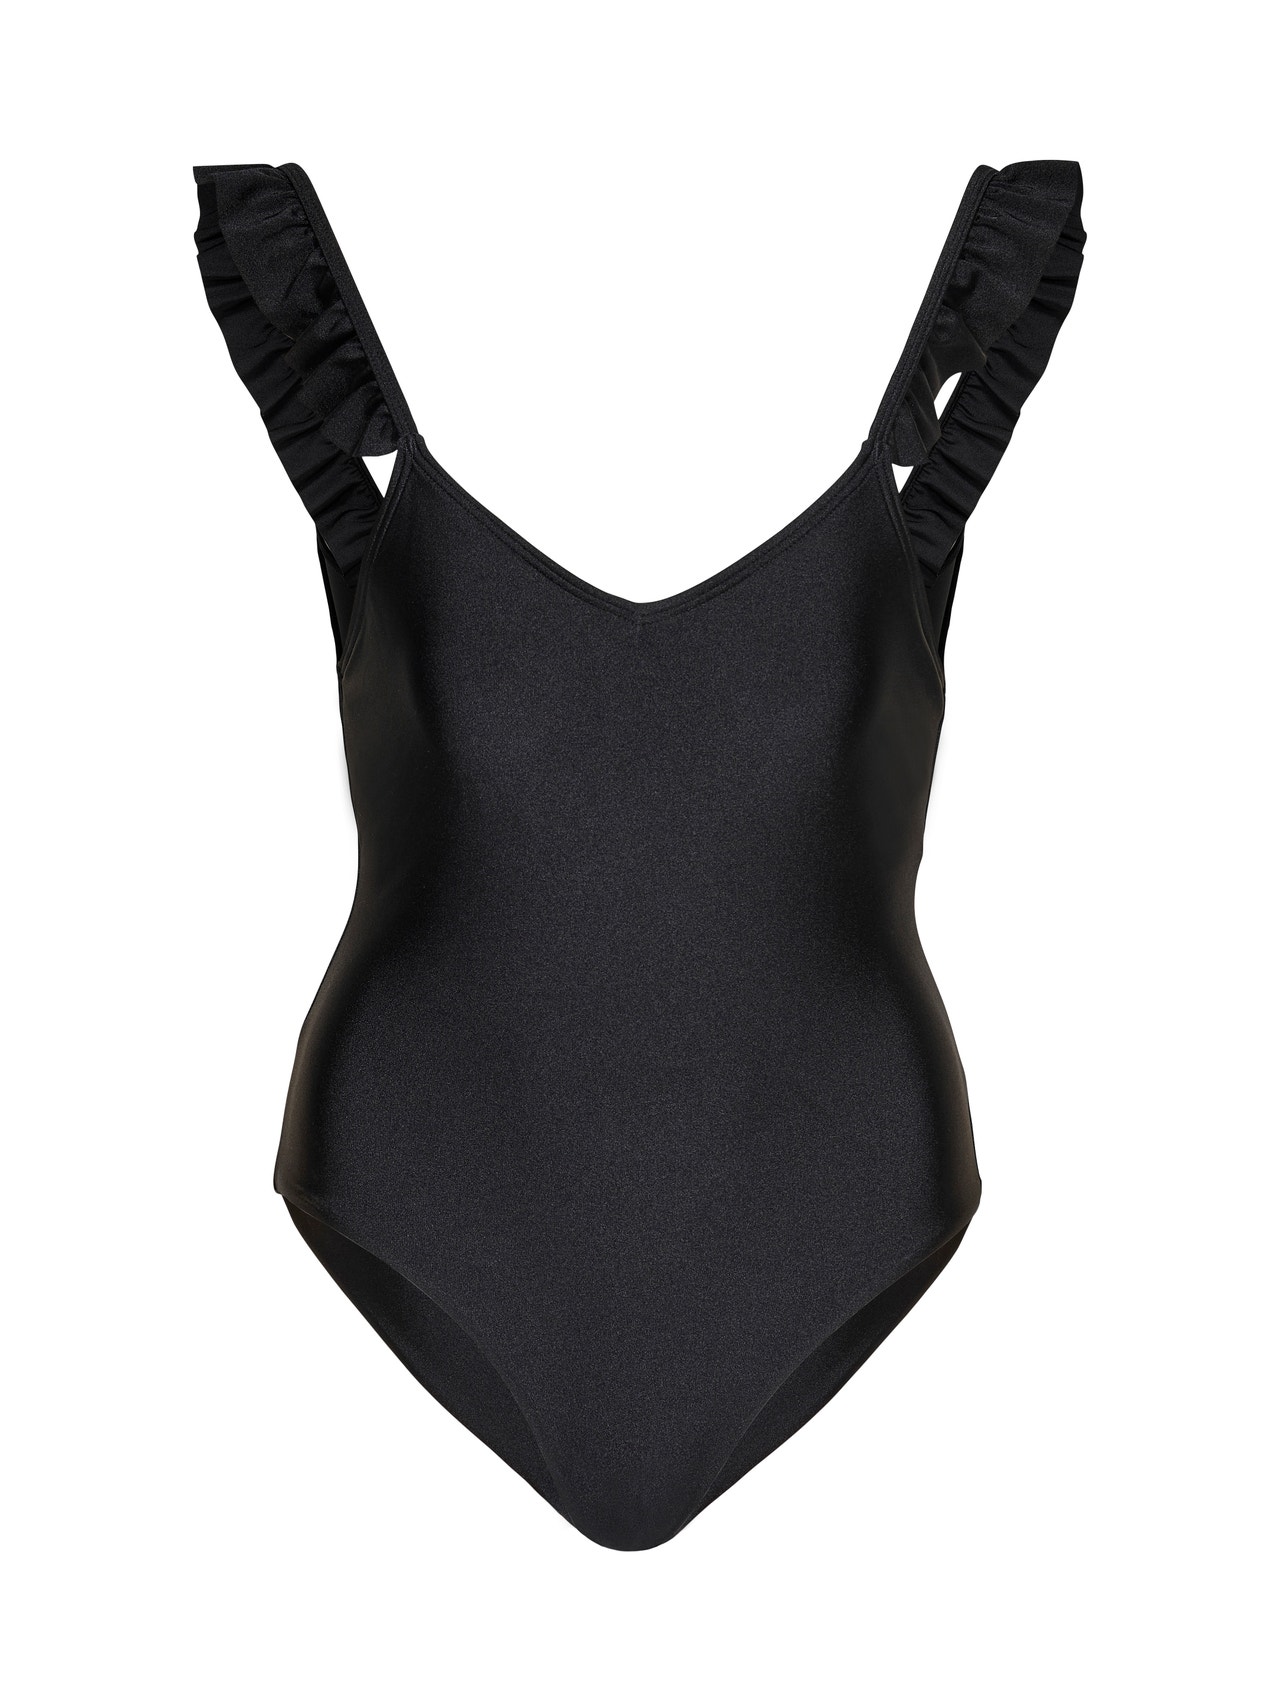 ONLY Swimsuit with ruffles -Black - 15282106